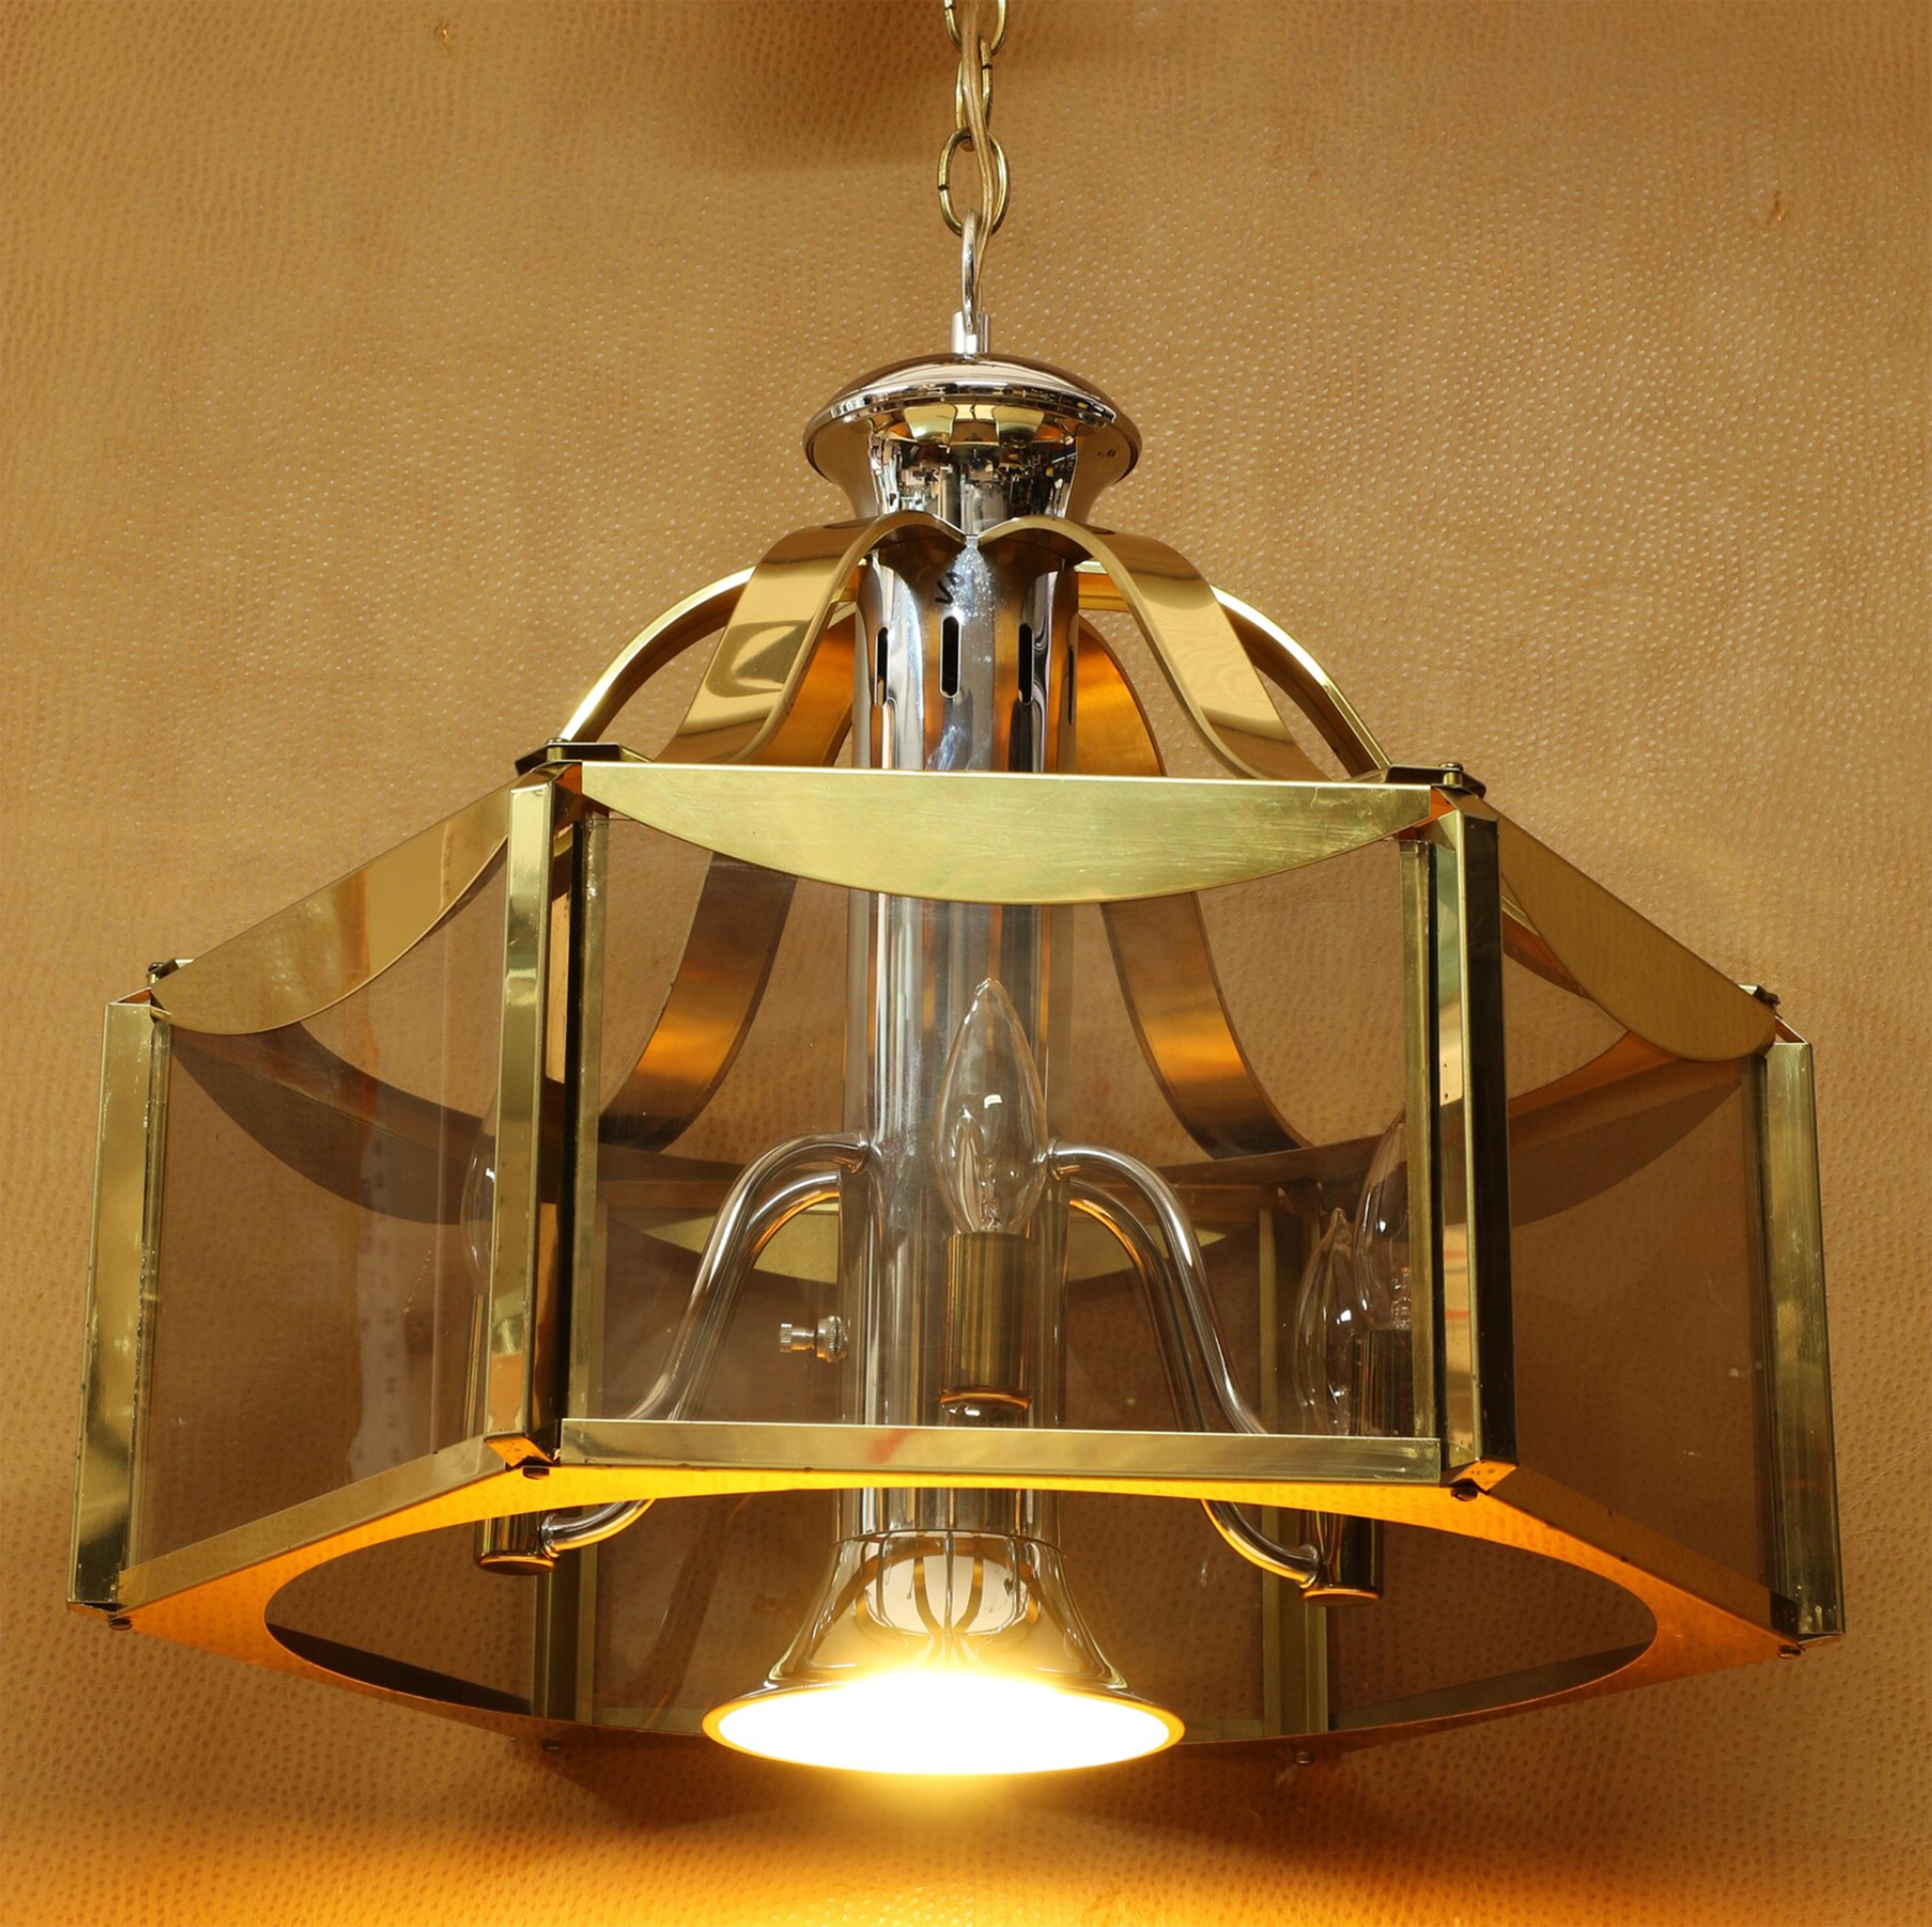 FREDRICK RAMOND BRASS AND GLASS PENDANT LIGHT/CHANDELIER - Mid-Century Modern
Fredrick Ramond lighting emphasizes modern elegance and exciting designs. The styles often combine ordinary materials in unique ways to produce sleek, intricate or